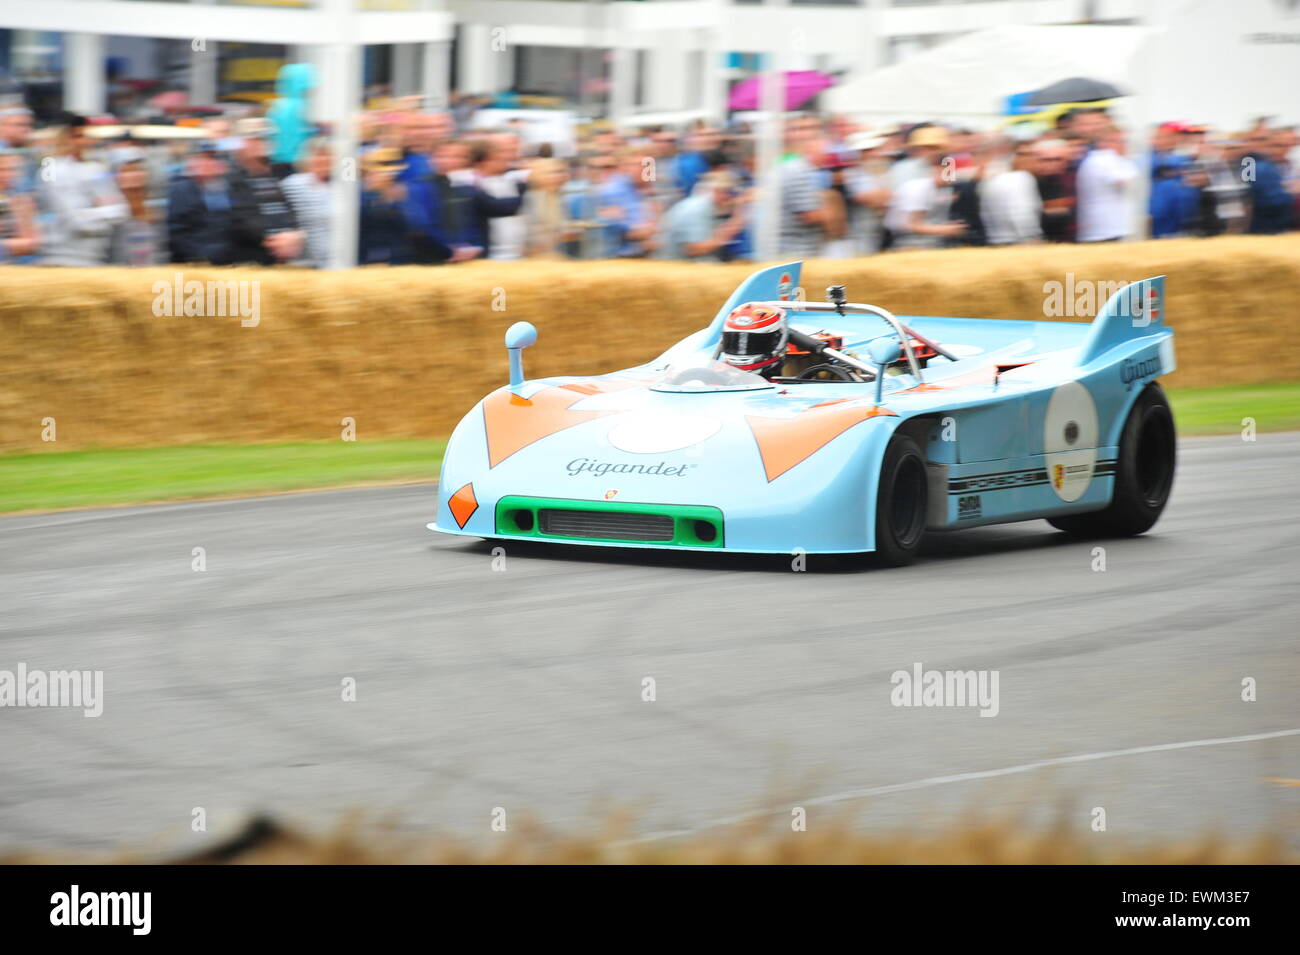 A Porsche 908 racing car at the Goodwood Festival of Speed. Racing drivers, celebrities and thousands of members of the public attended the Goodwood Festival of Speed to see modern and old racing cars and bikes in action. Stock Photo